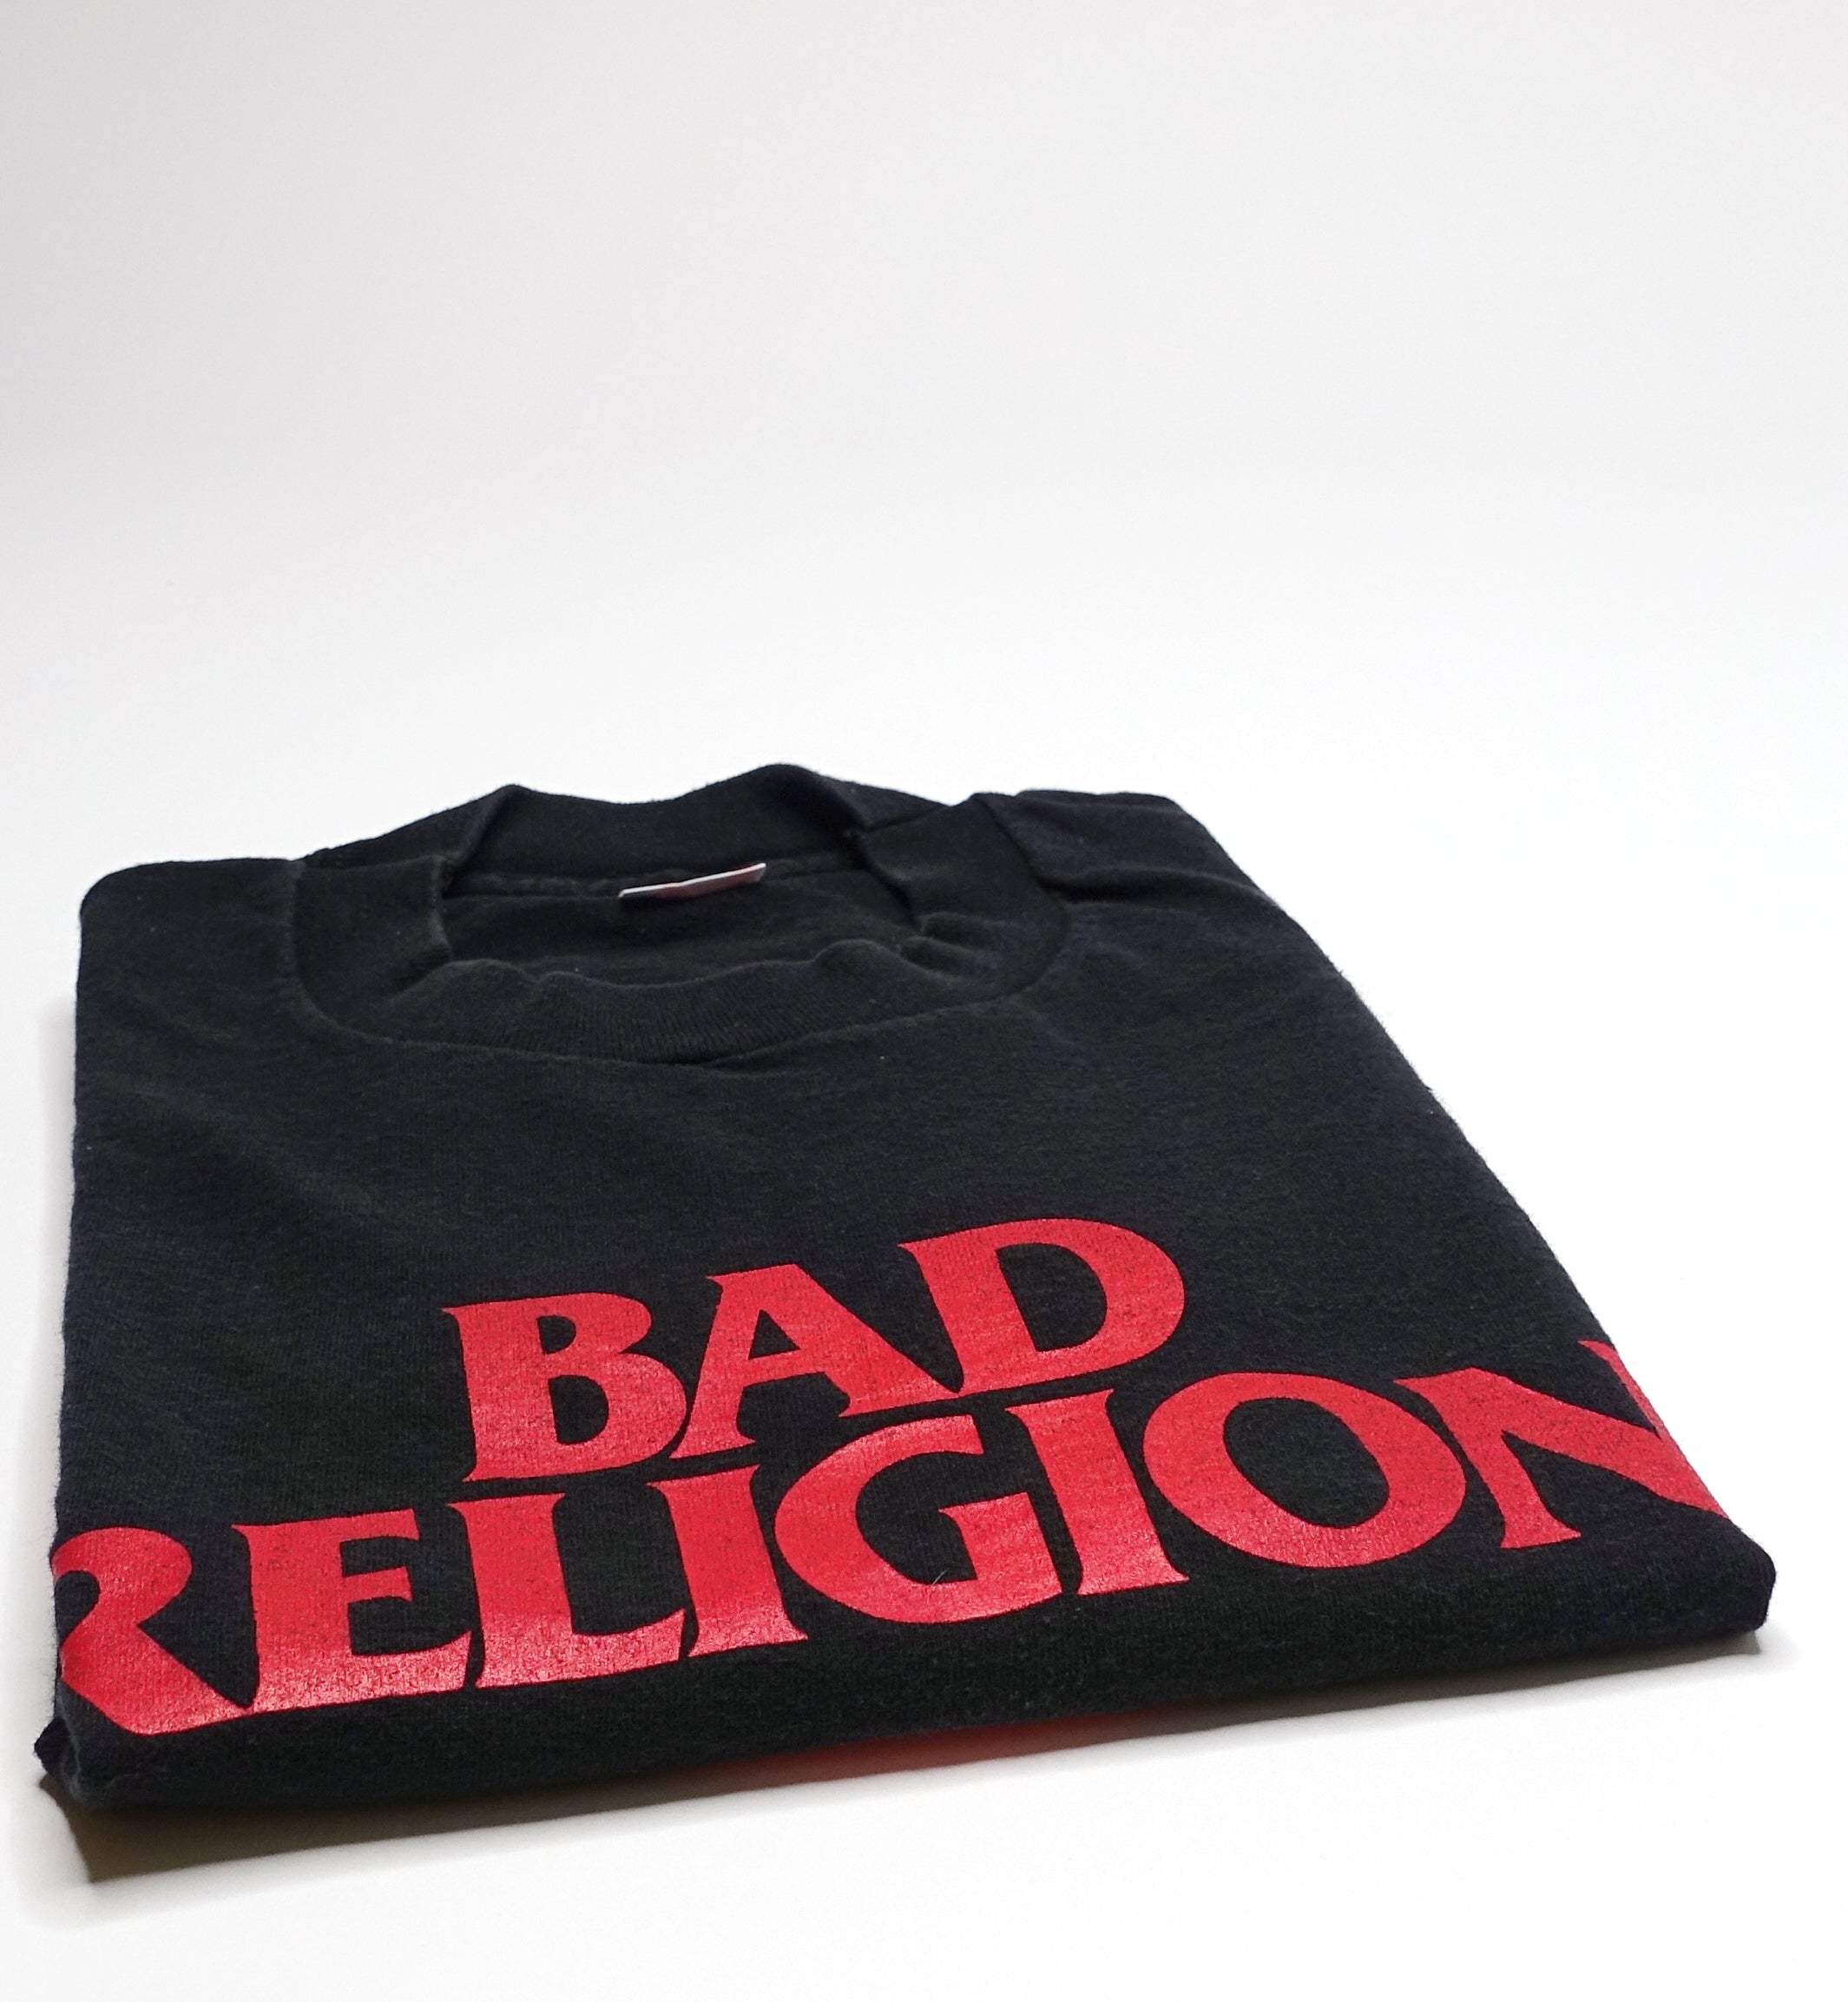 Bad Religion - Recipe For Hate 1994 North American Tour Shirt Size XL